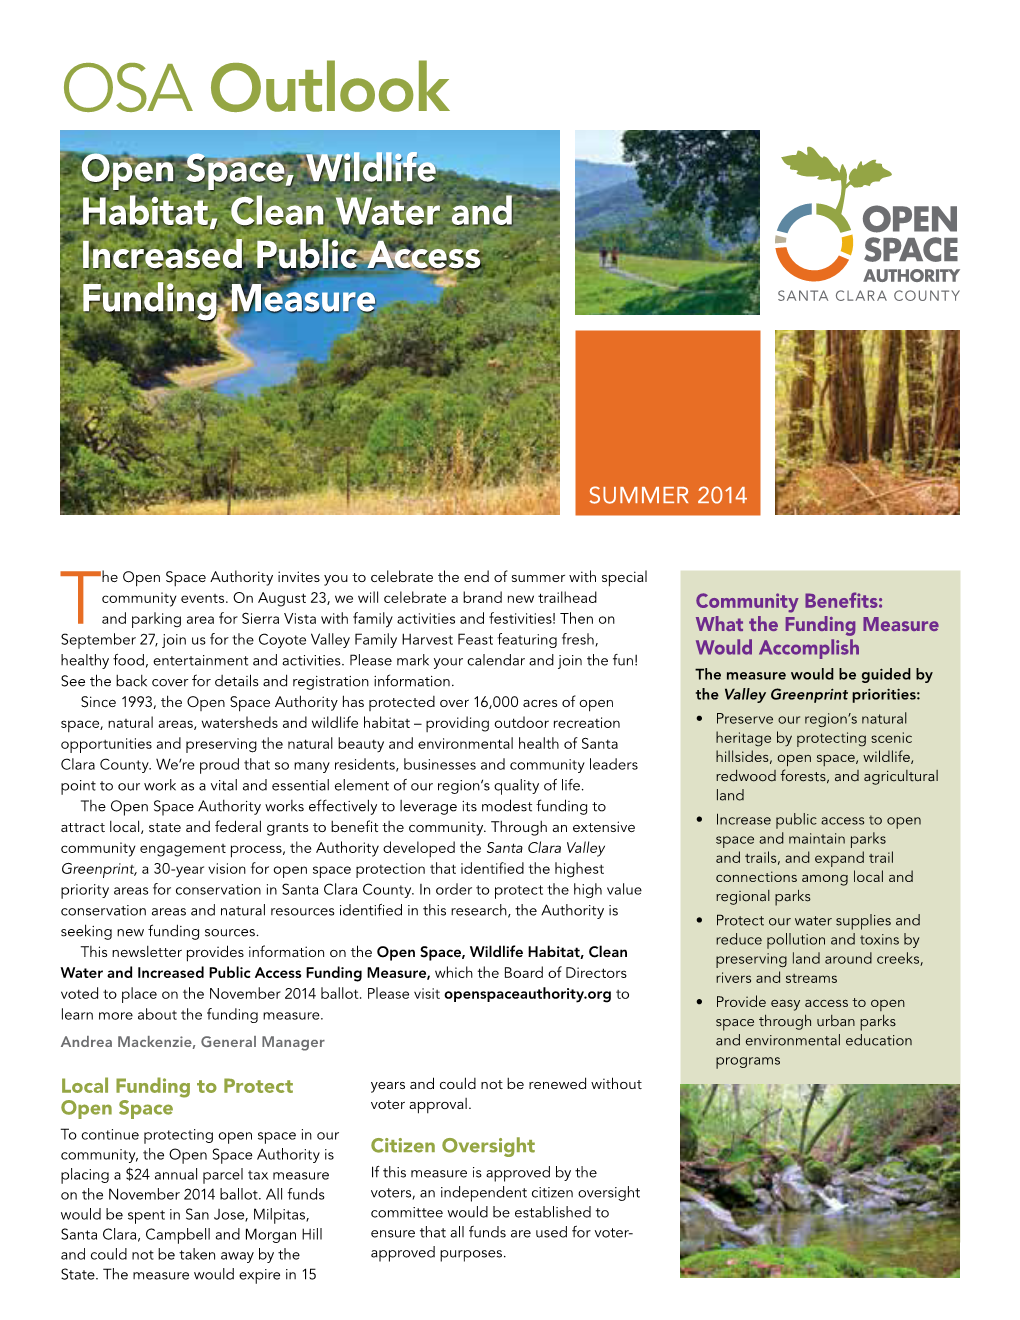 OSA Outlook Open Space, Wildlife Habitat, Clean Water and Increased Public Access Funding Measure